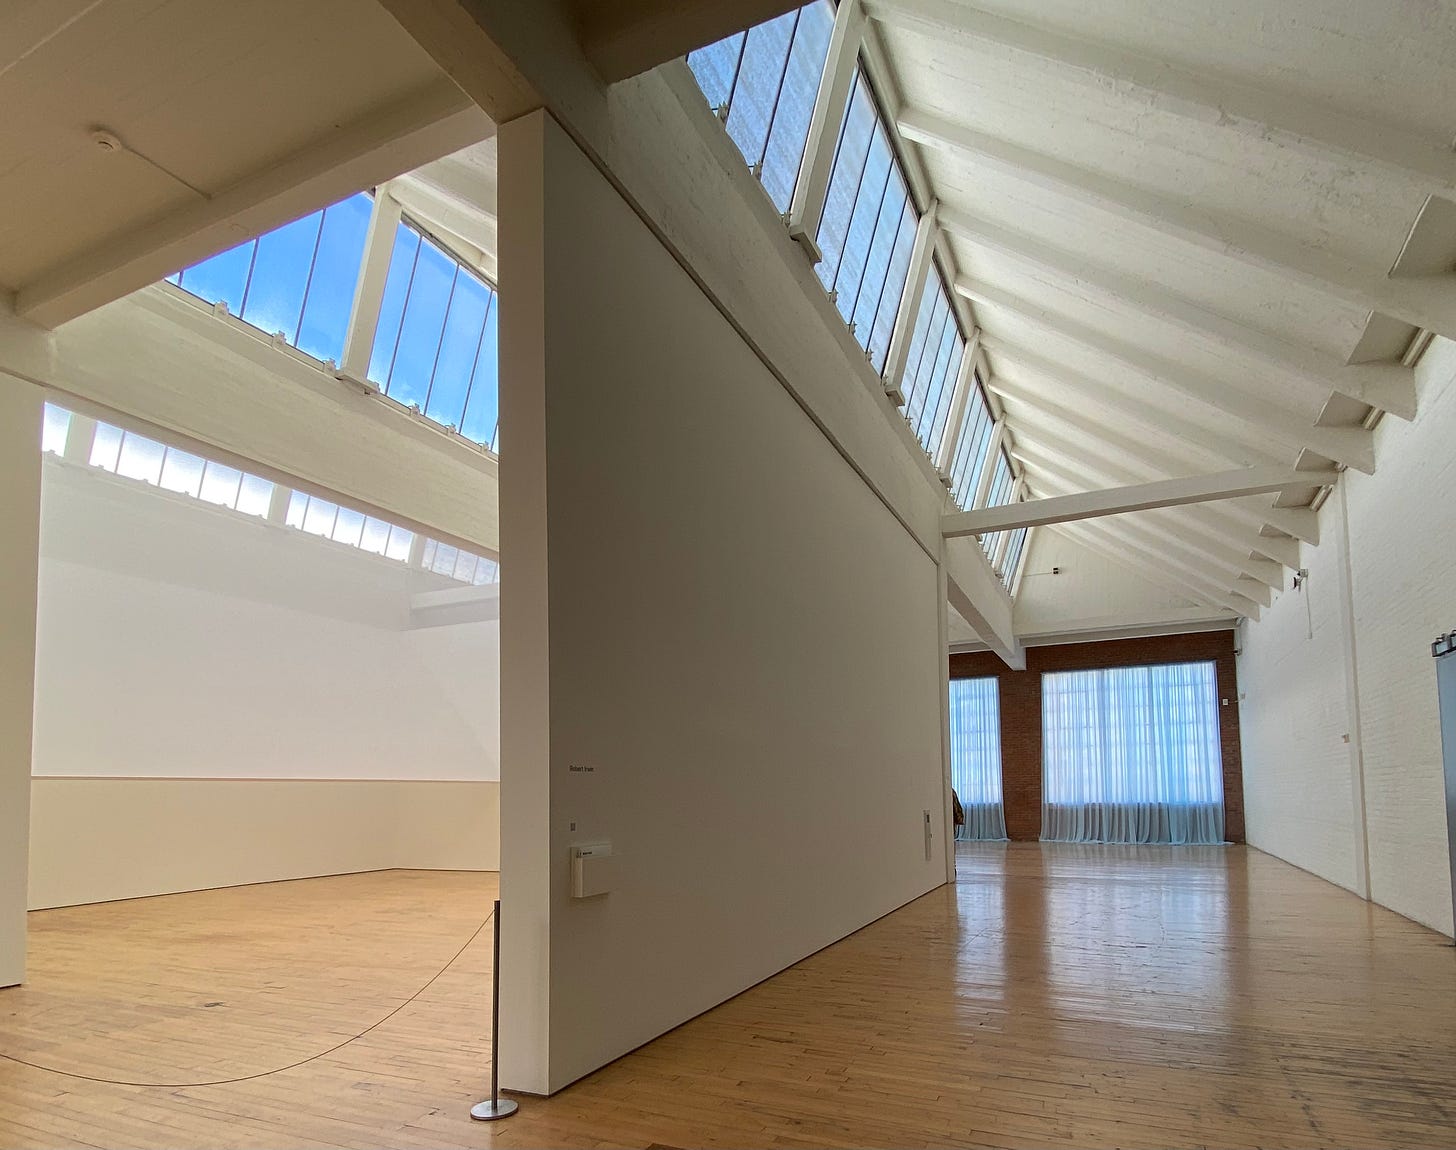 View of Robert Irwin, Full Room Skylight – Scrim V – Dia Beacon, 1972/2022 (right), and Felix Gonzalez-Torres, “Untitled” (Loverboy), 1989 (left), as installed at Dia Beacon. On the left you can see into a gallery room with skylights showing a clear blue sky. The volume of room is subtly divided at an angle from top to bottom by a half-visible pale white scrim. To the right you can see one end of the room where Felix Gonzalez-Torres’s blue curtains have been installed. 